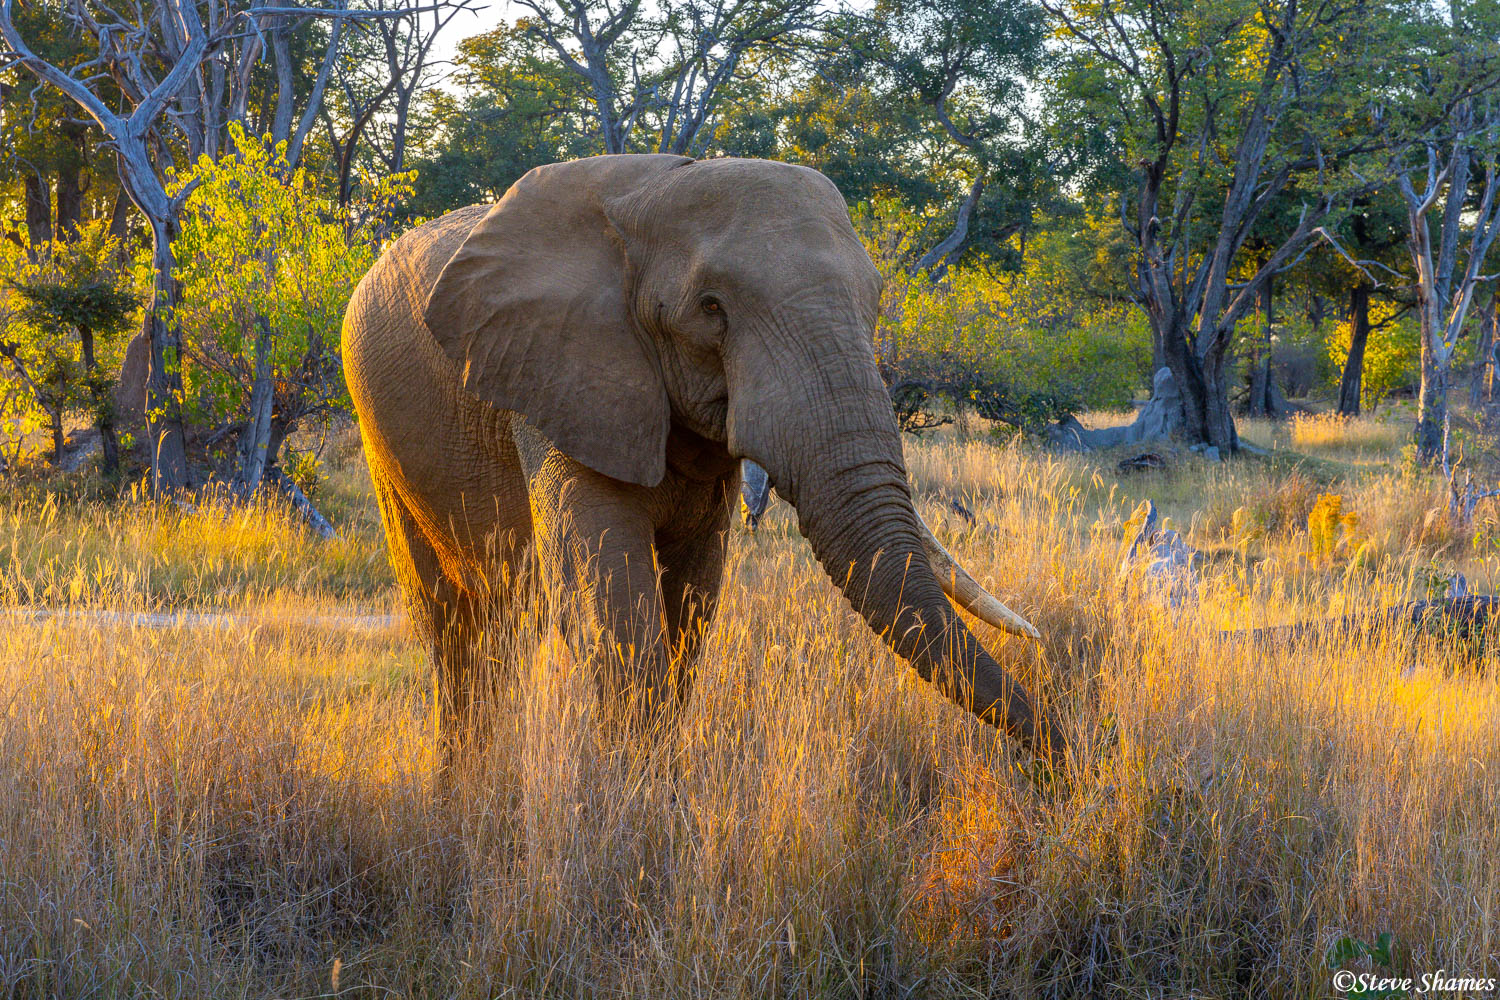 Elephant in the early morning grass at Moremi Game Reserve.